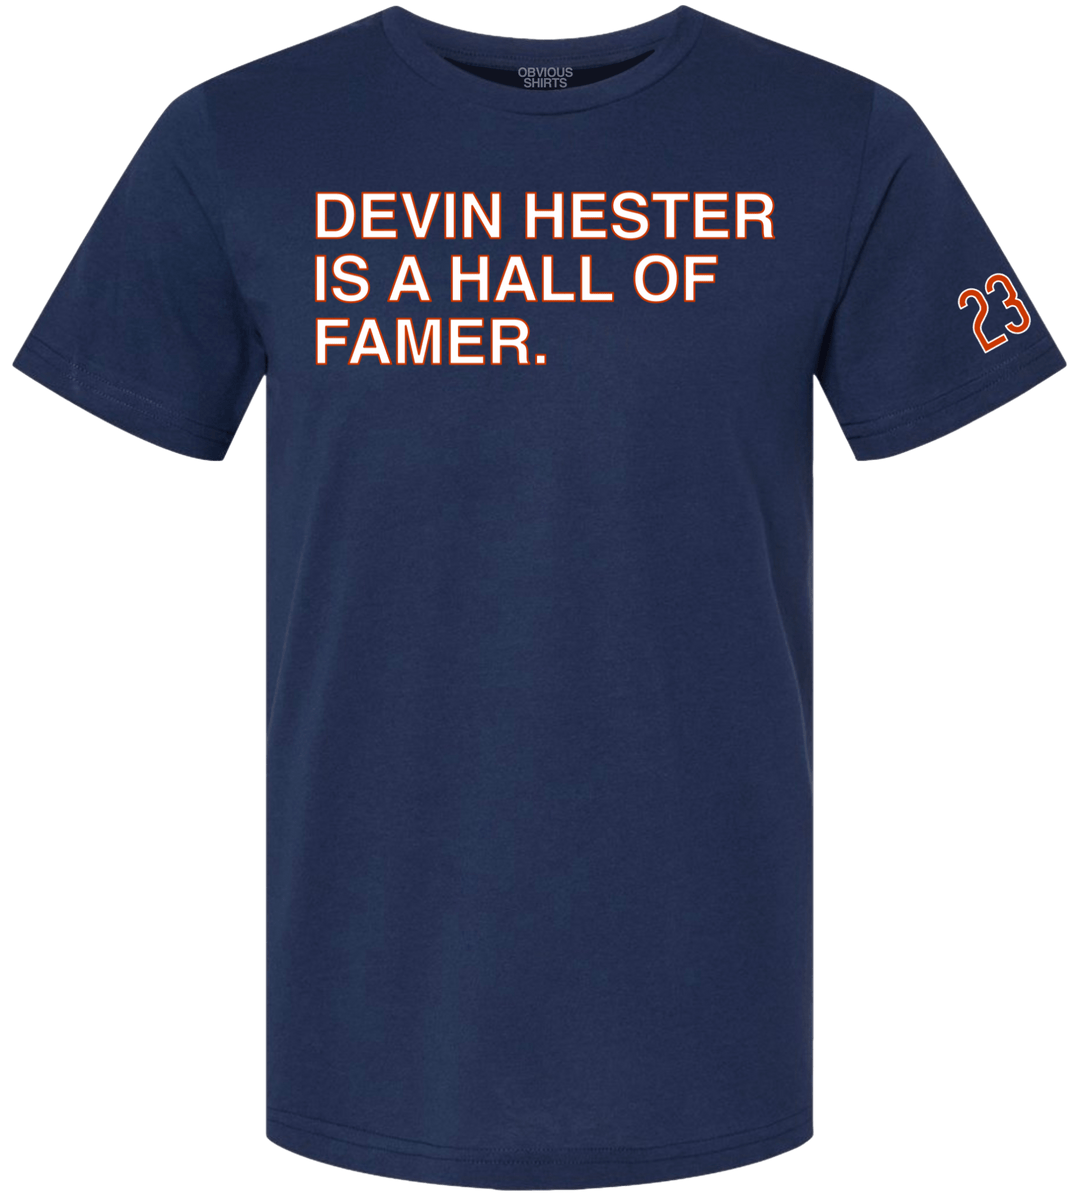 DEVIN HESTER IS A HALL OF FAMER. - OBVIOUS SHIRTS